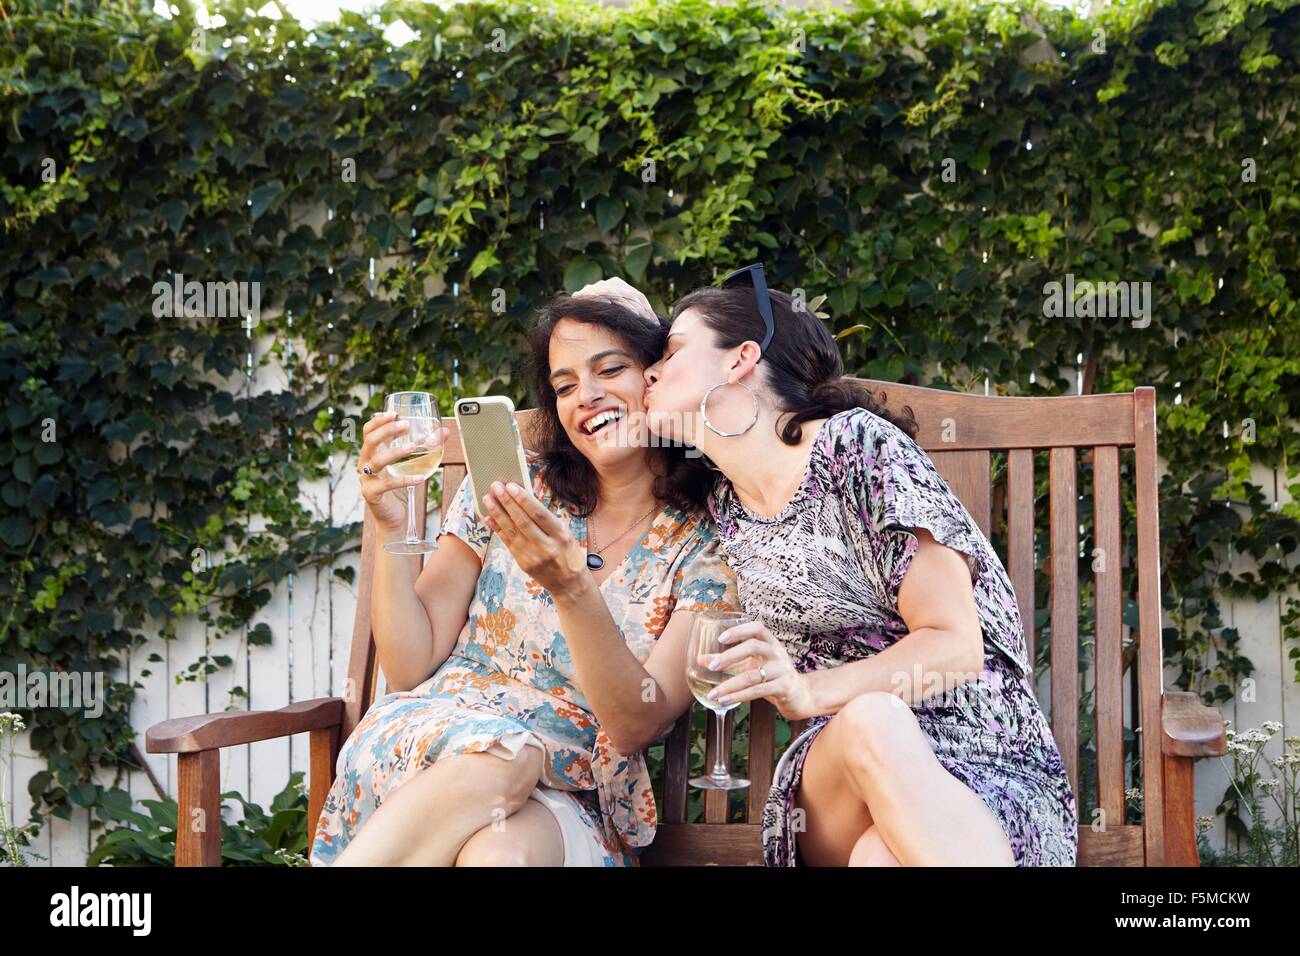 Two women posing for smartphone selfie on patio Stock Photo